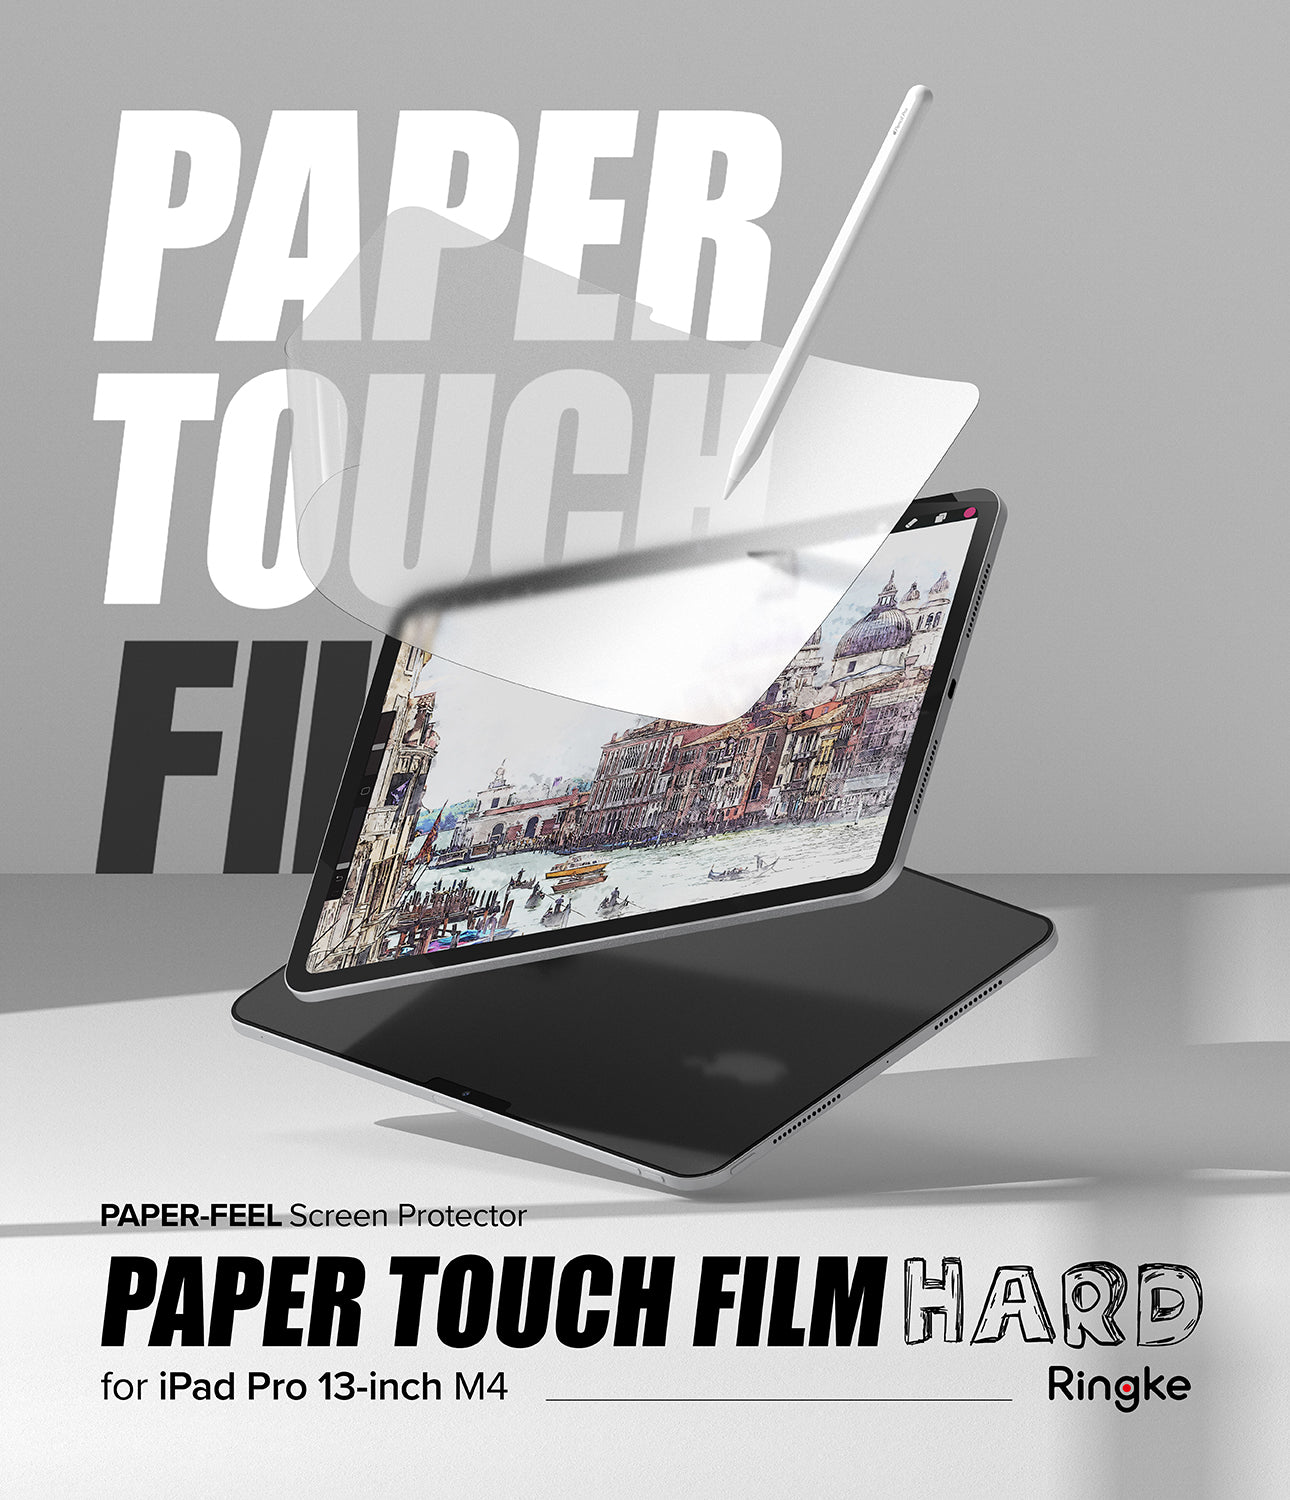 iPad Pro 13" (M4) Screen Protector | Paper Touch Film - Hard - By Ringke